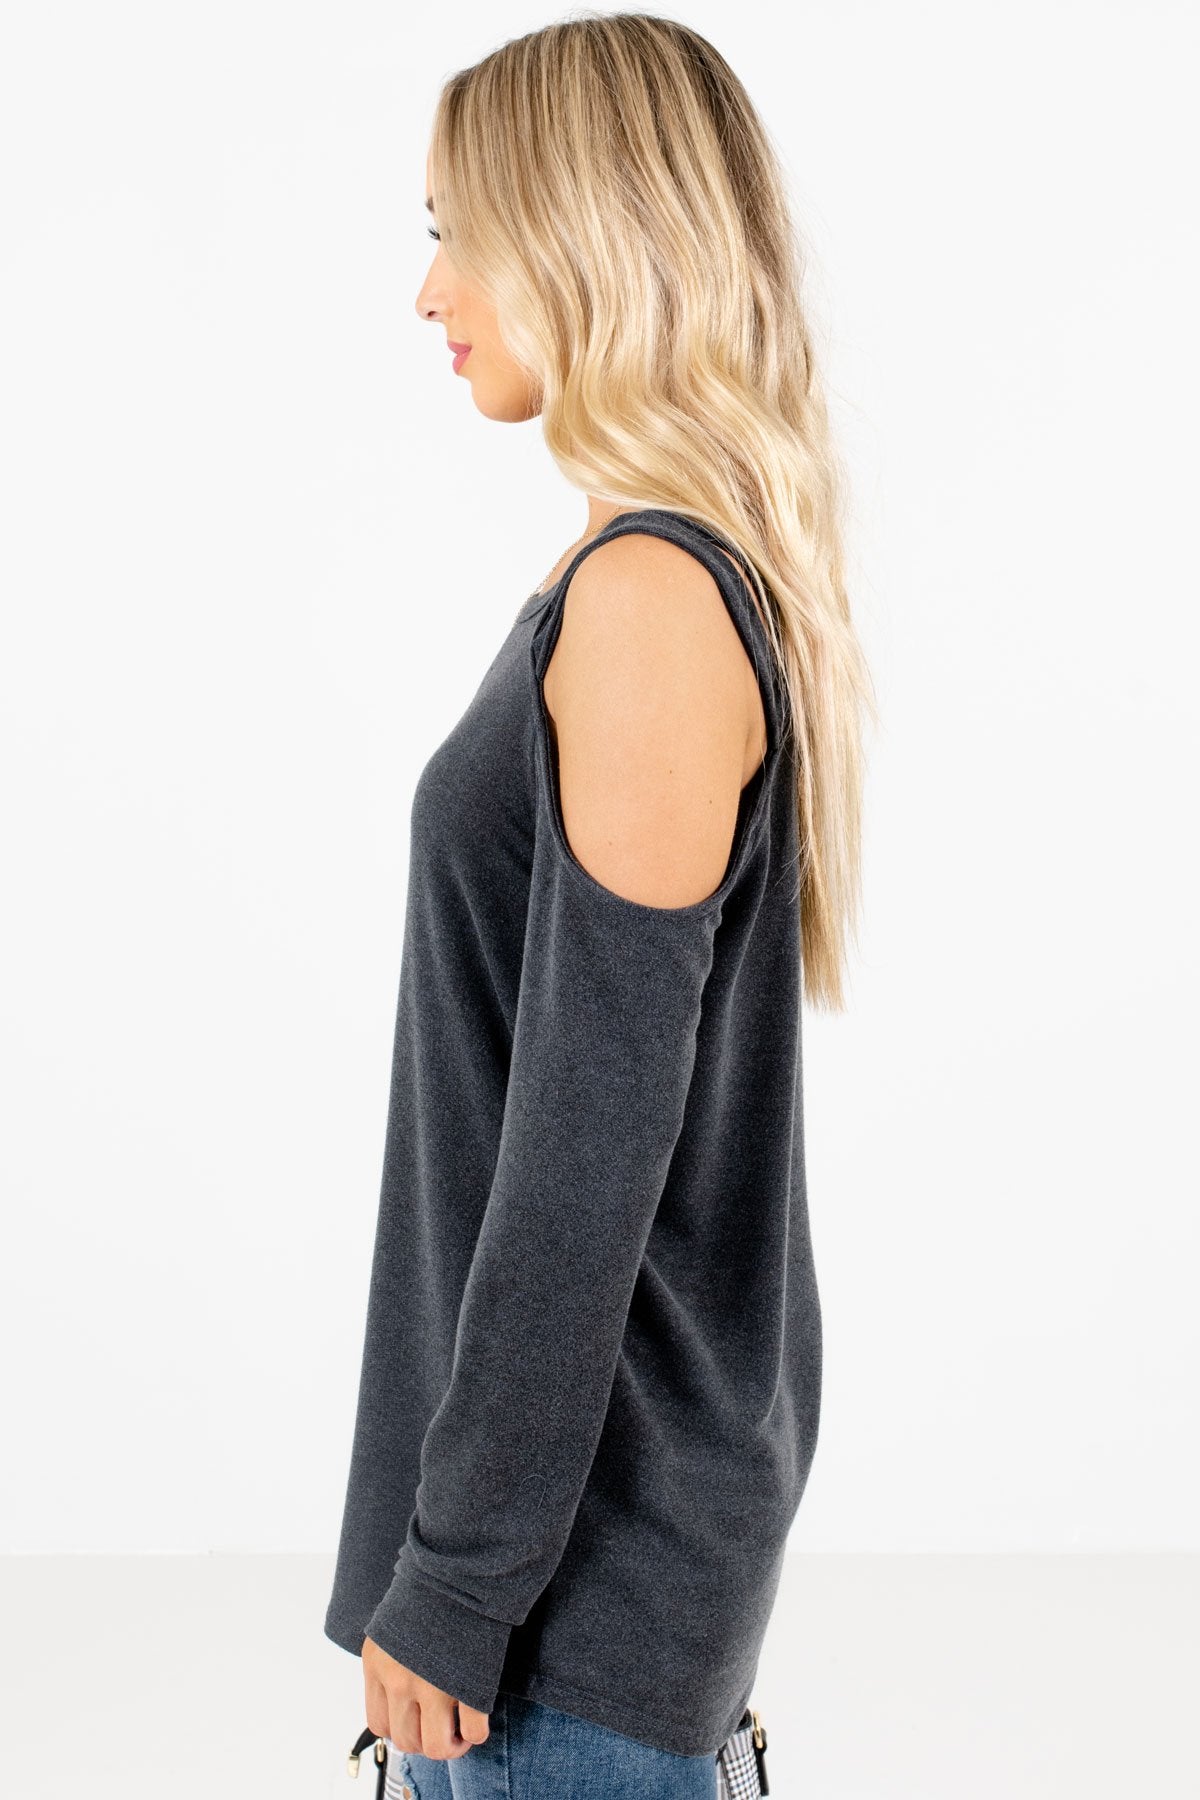 Charcoal Gray Long Sleeve Boutique Tops for Women